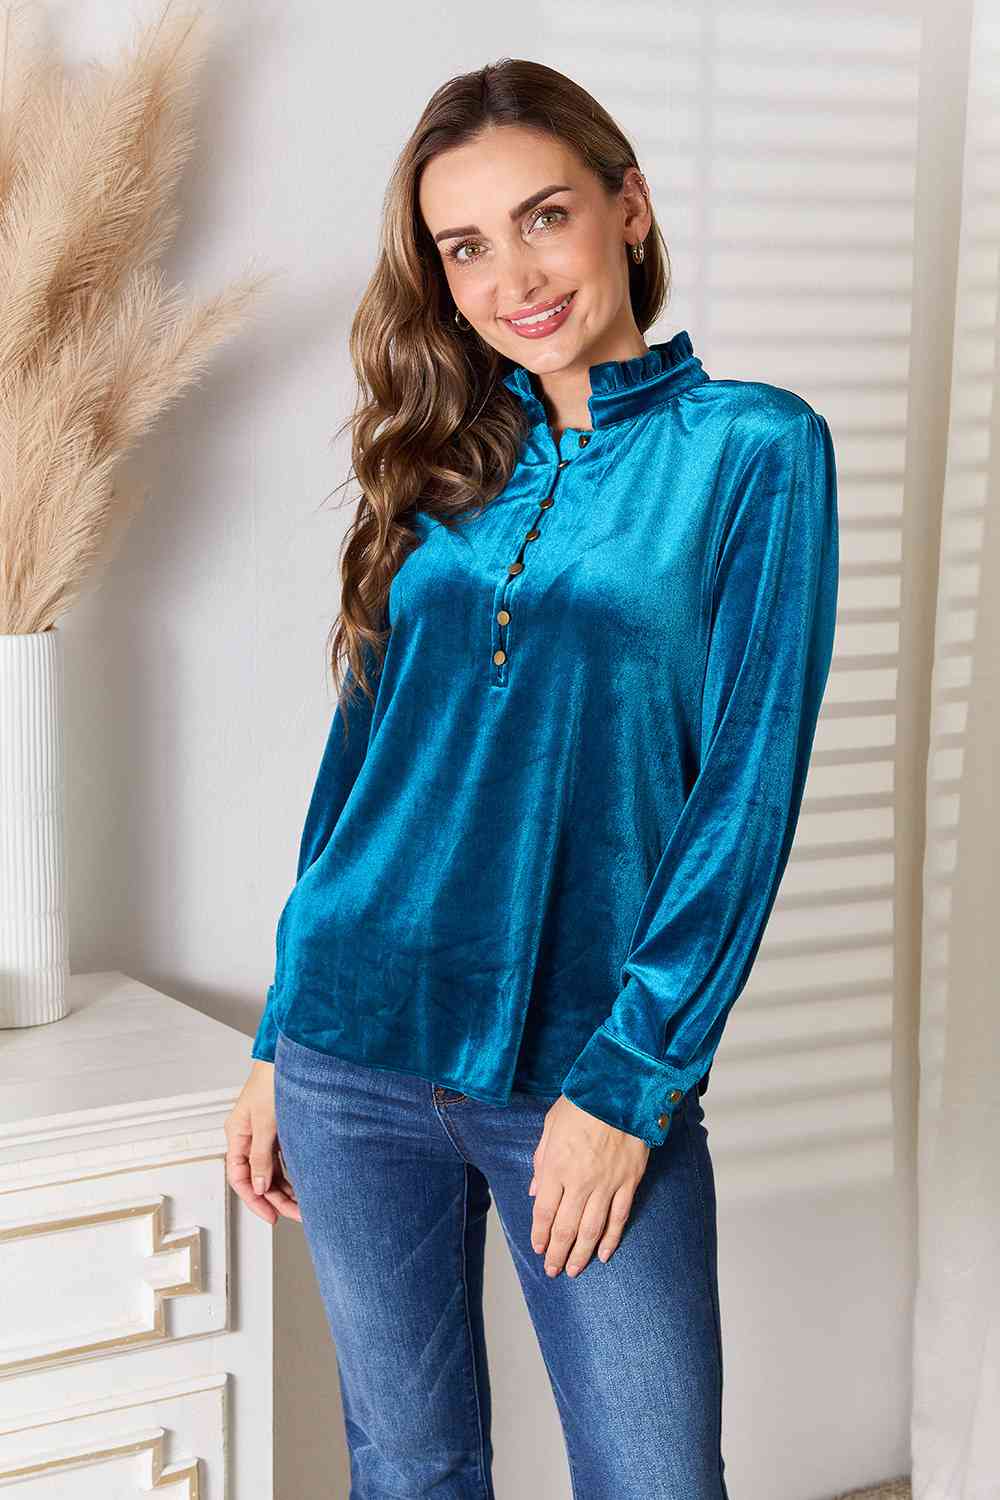 Notched Neckline Buttoned Long Sleeve Velvet Blouse in TurquoiseBlouseDouble Take